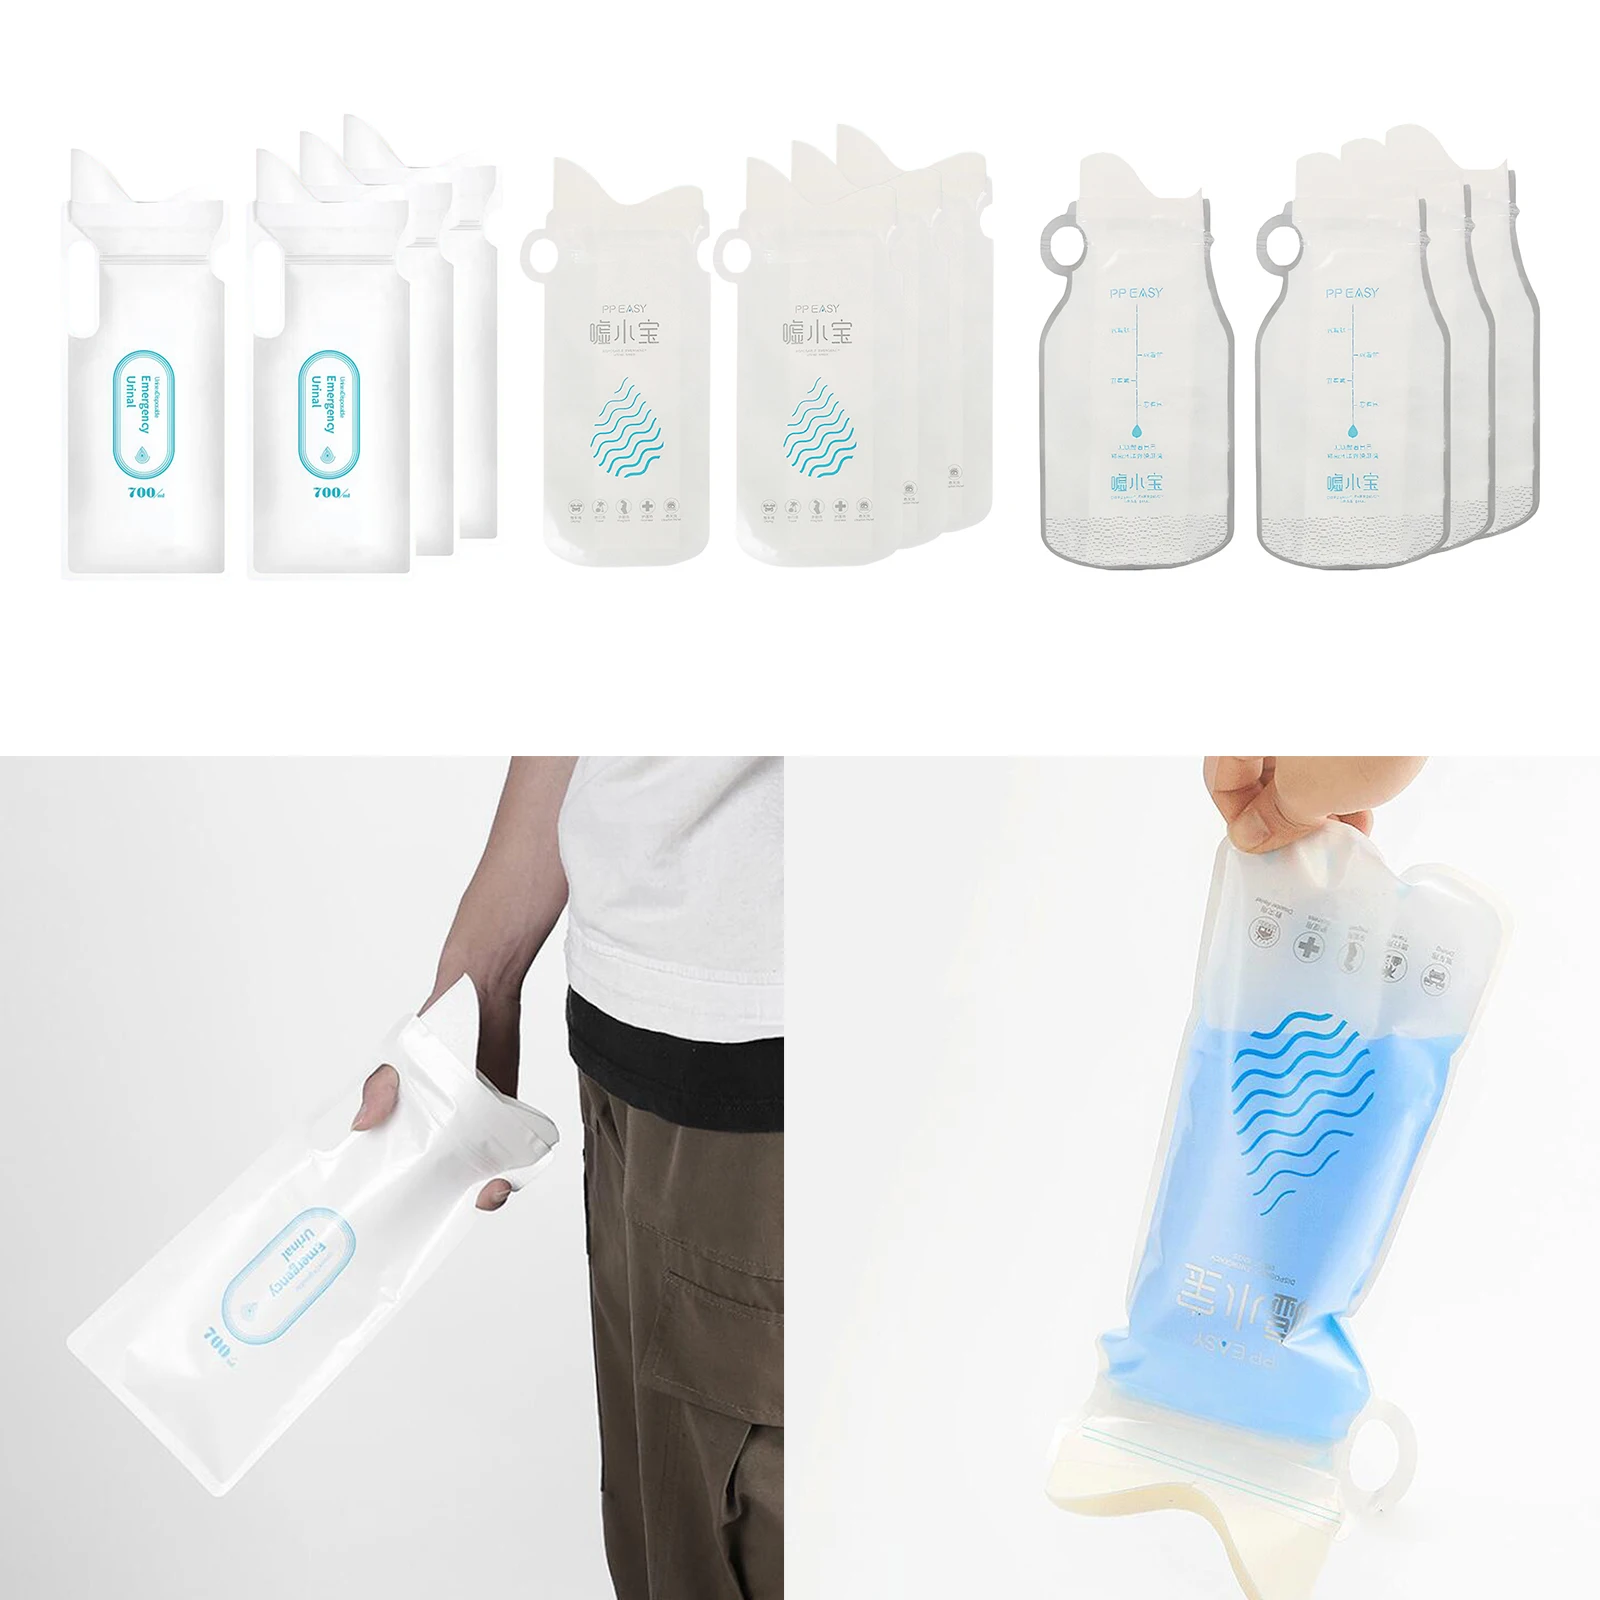 4x Unisex Disposable Urine Bags Women Men Camping Pee Bags Toilet Traffic Crowd for Adults Kids Outdoor Seasick Car Hiking